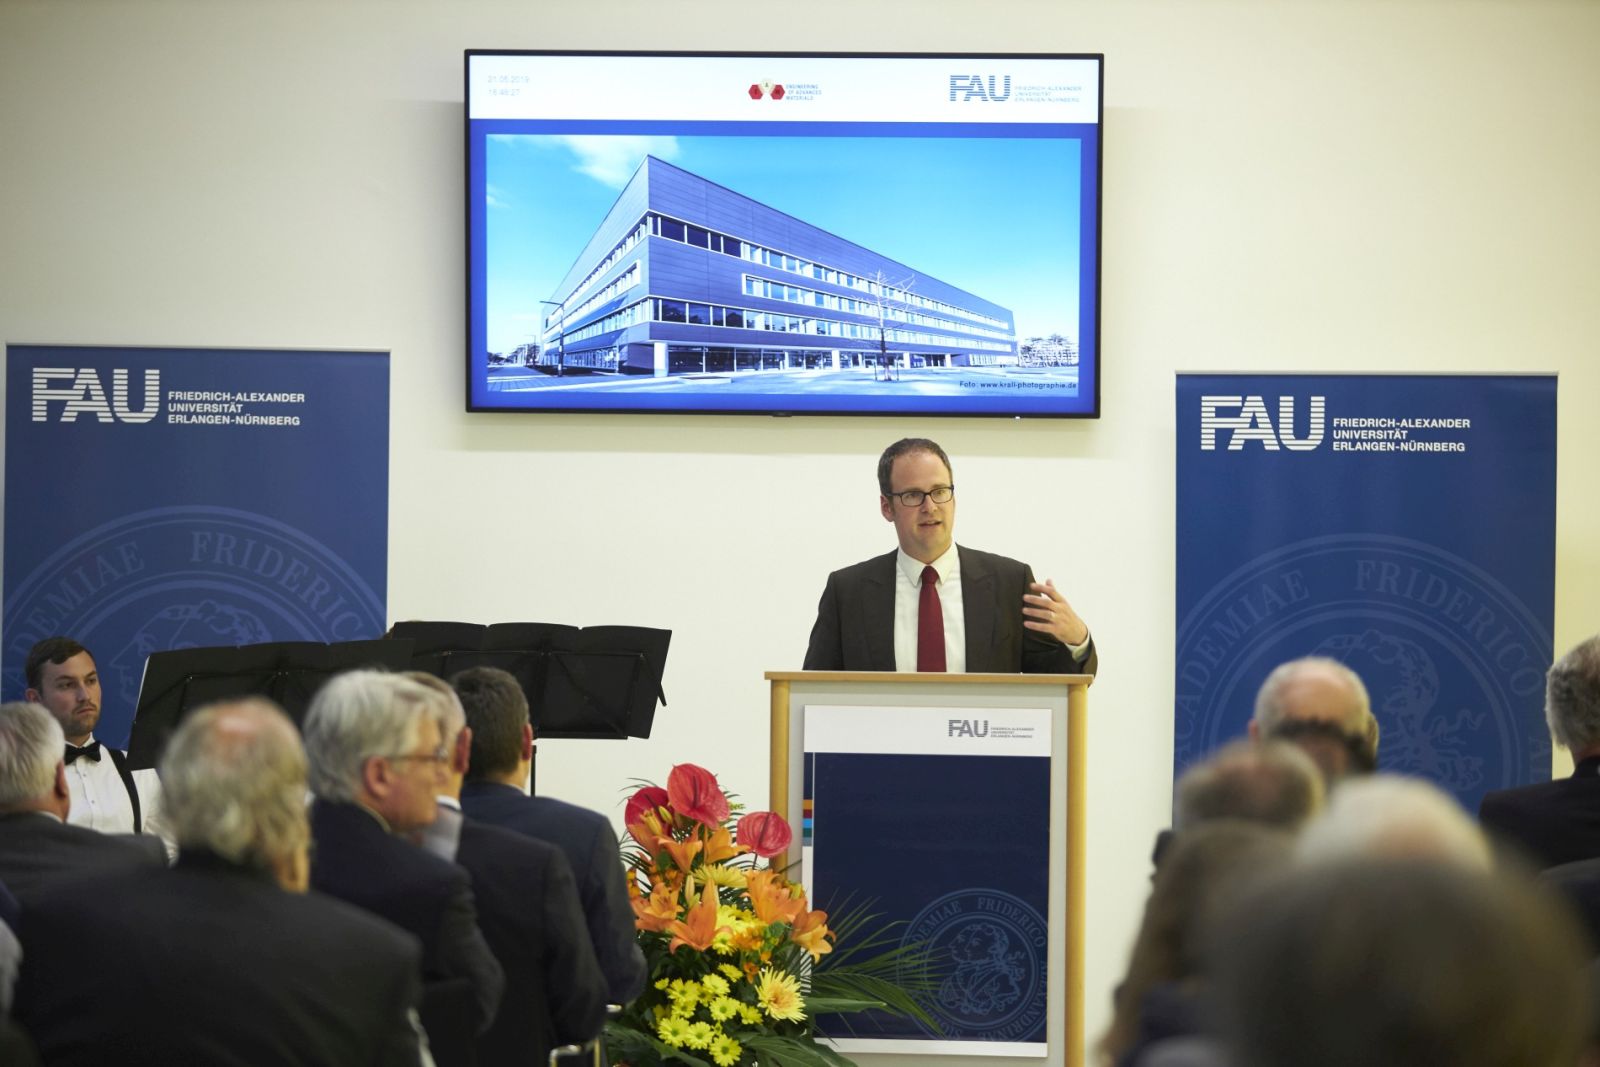 High-profile guests from politics and industry including the Bavarian Minister of Science Bernd Sibler and the Bavarian Minister of the Interior Joachim Herrmann attended the official inauguration ceremony for the new Interdisciplinary Centre for Nanostructured Films, covering an area of approximately 4,600 square meters. (Image: FAU/Erich Malter)